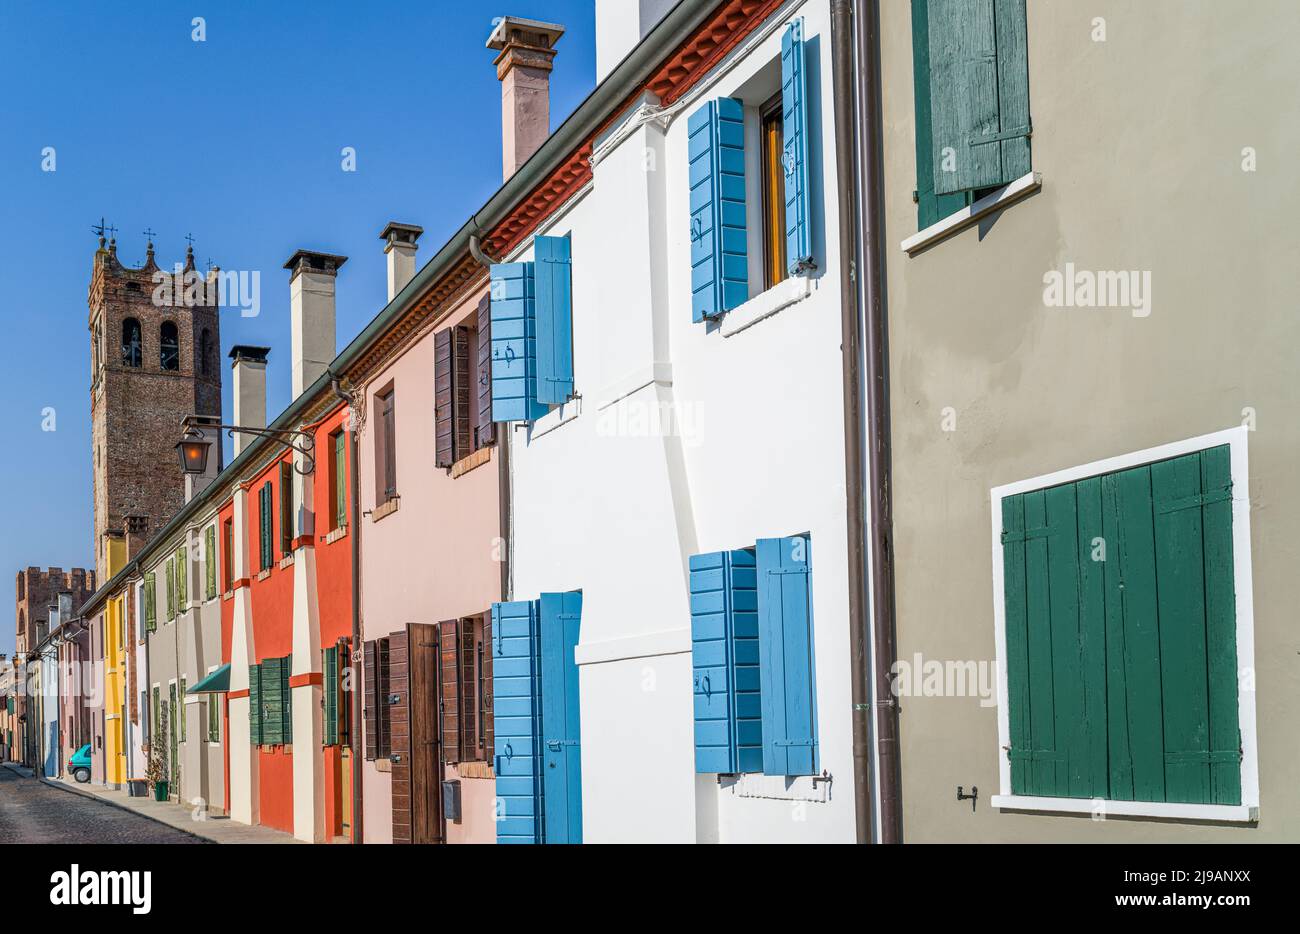 Italy, Montagnana,traditional colorful houses leaning against the ancient medieval walls that surround the town Stock Photo